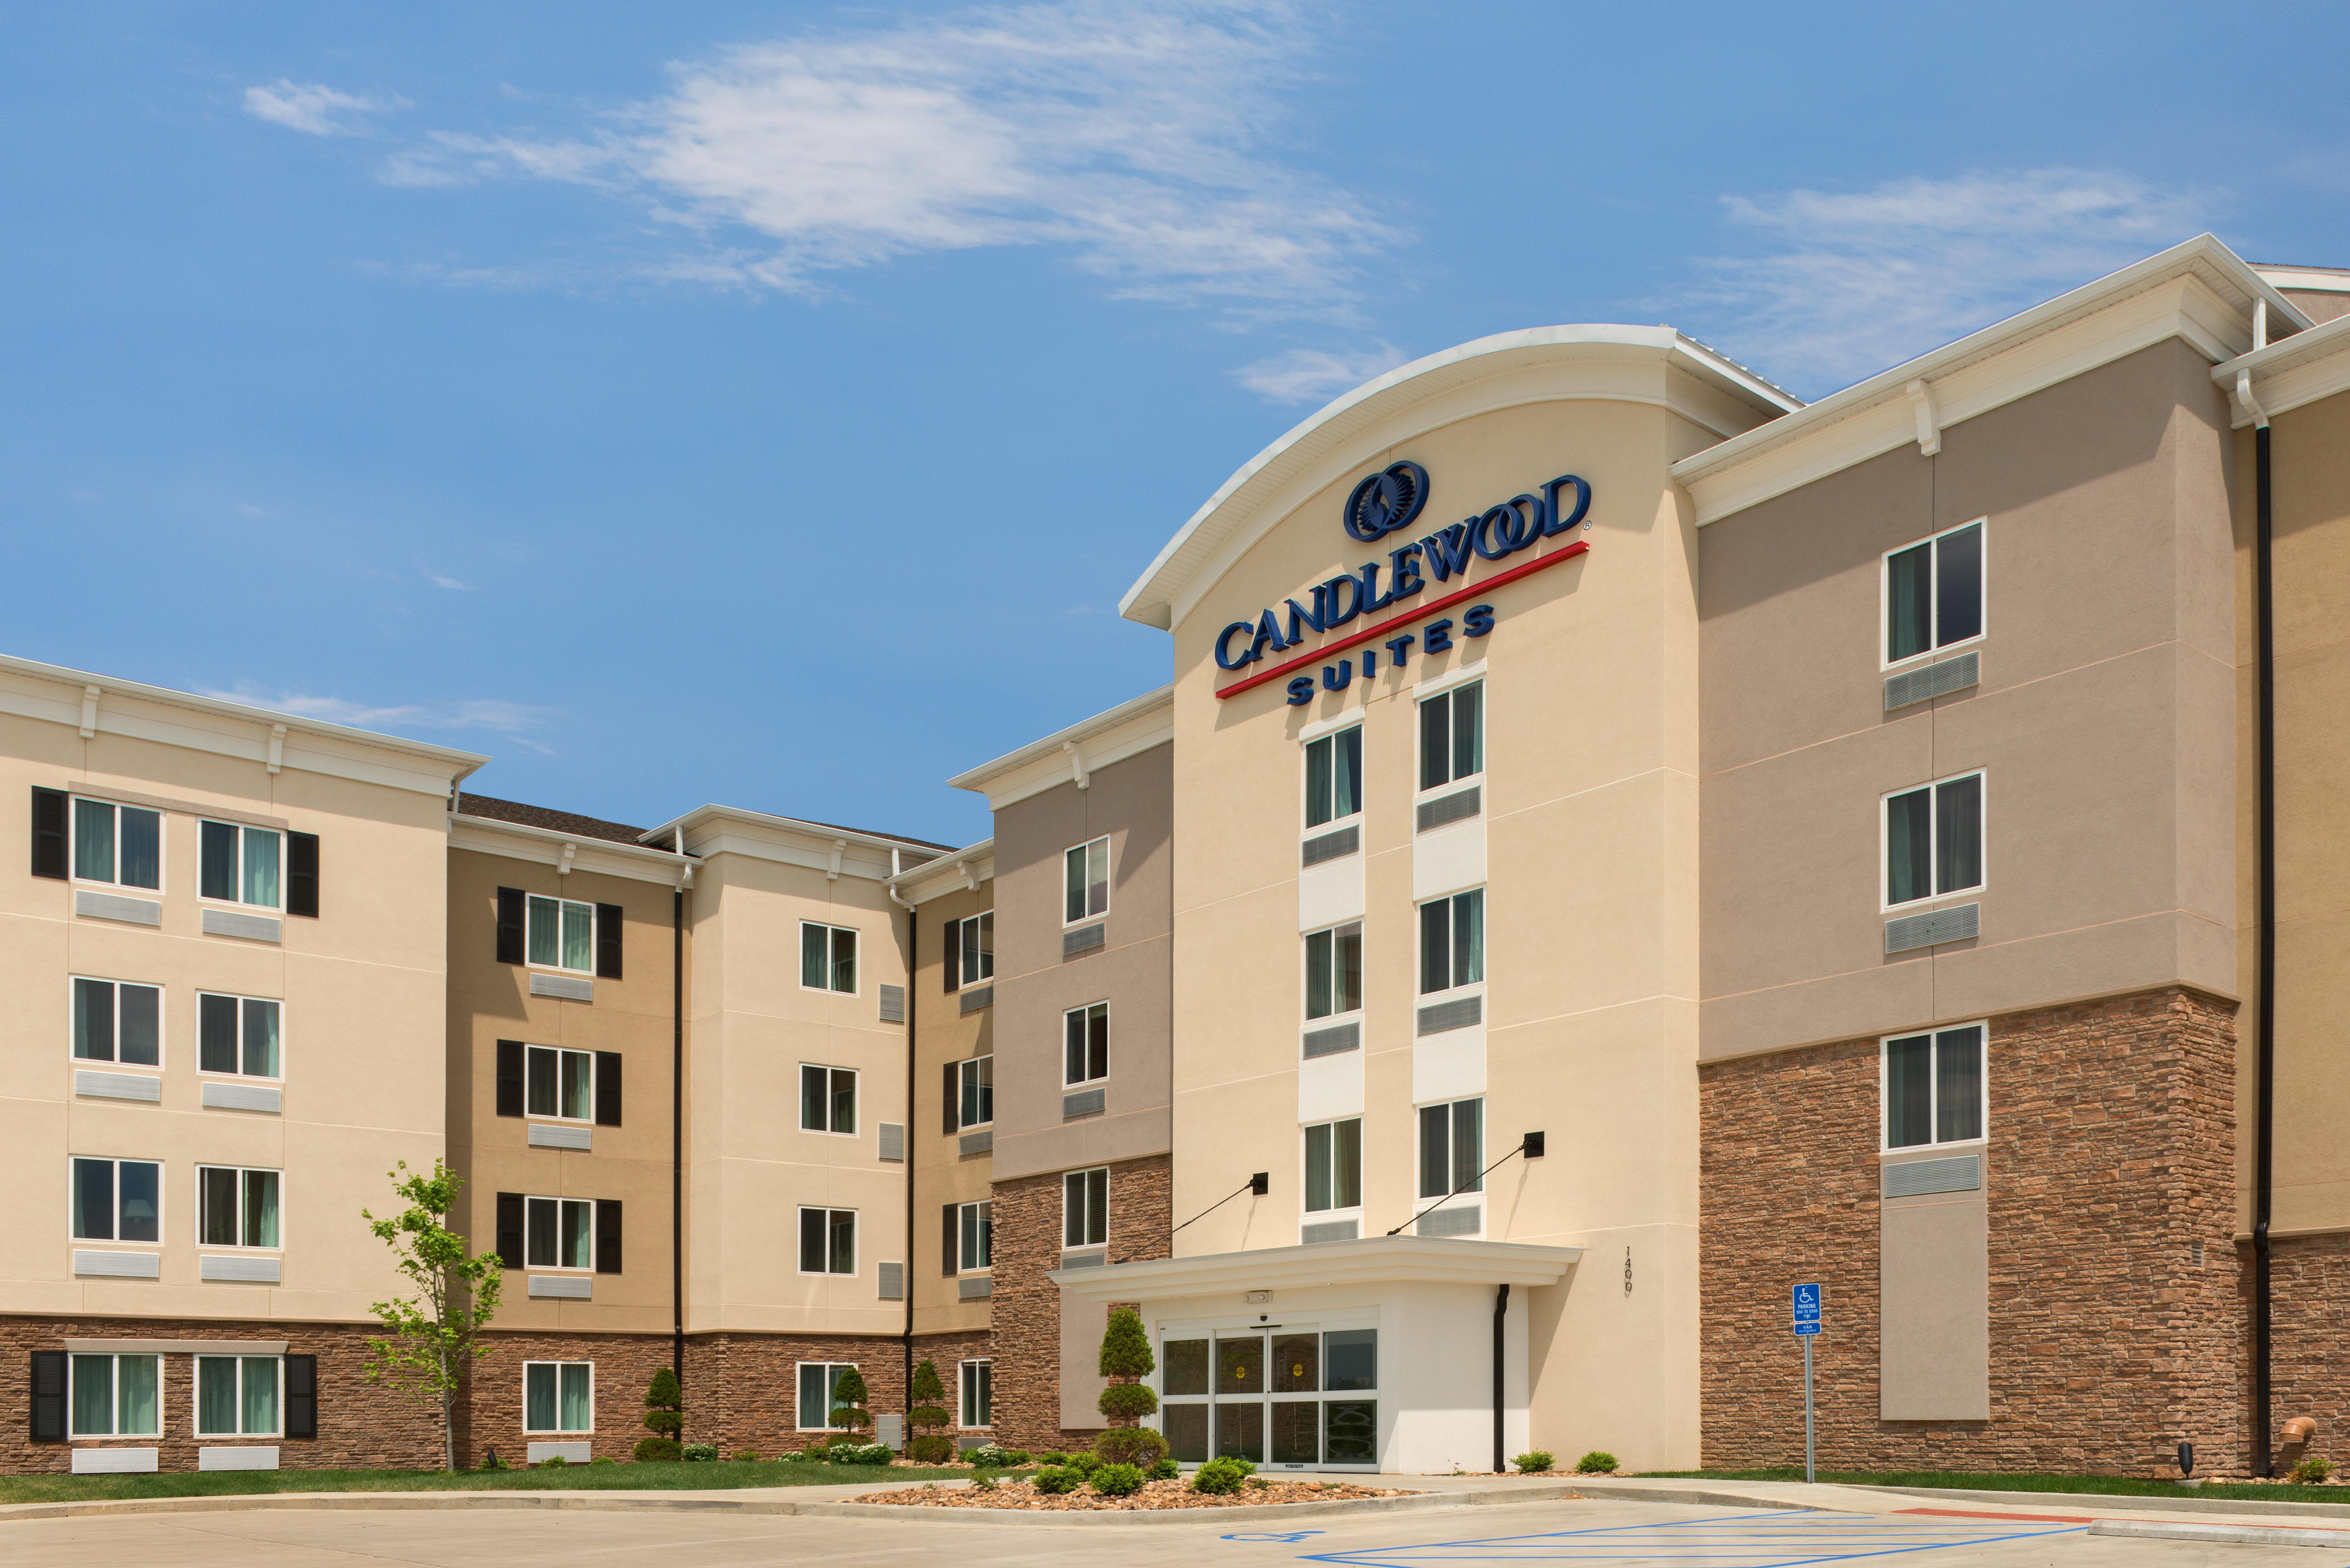 Candlewood Suites Columbia Hwy 63 and I 70